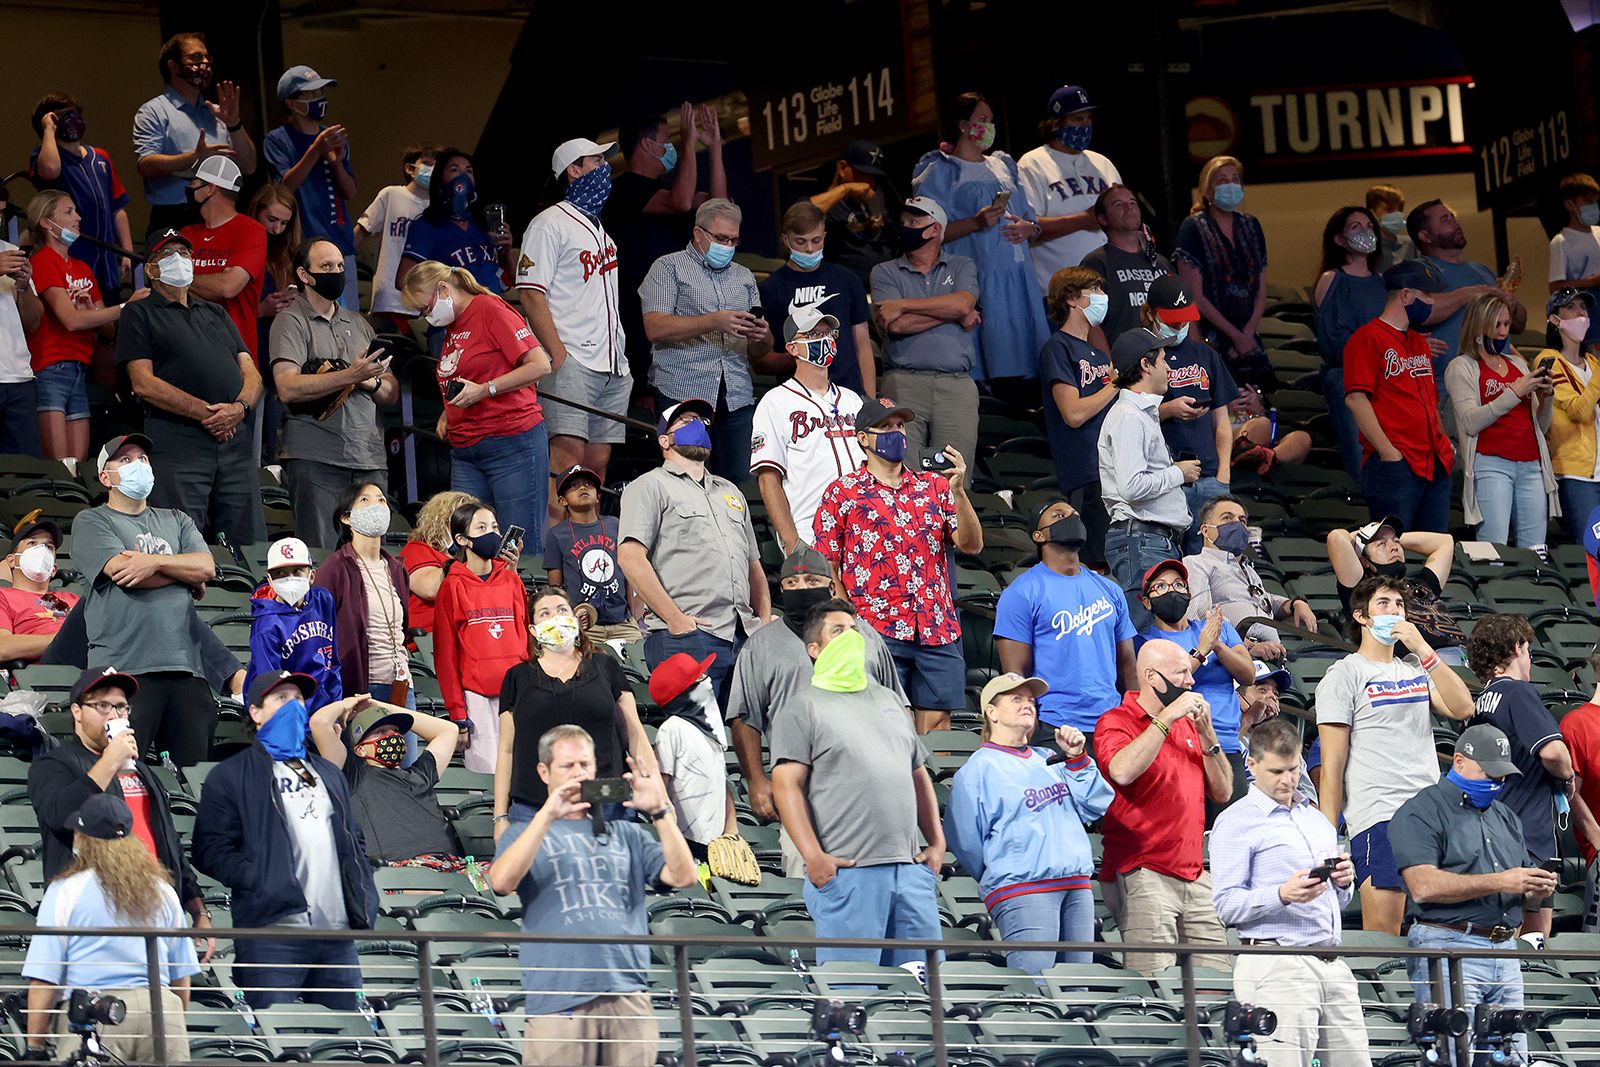 MLB: No more 'fake crowd noise' as fans return for first time since March